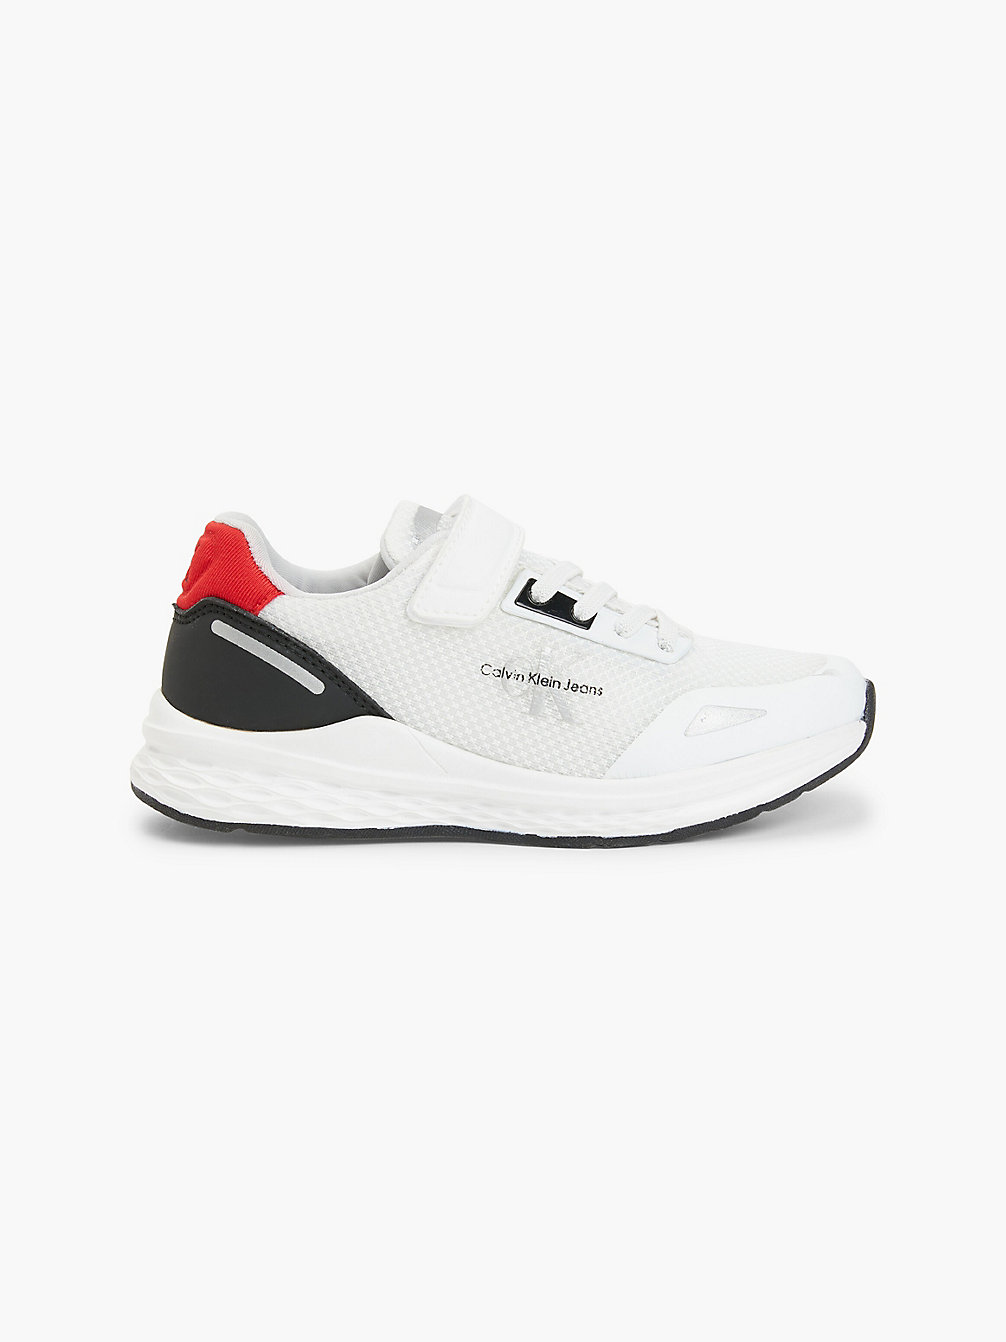 WHITE RED > Mesh Sneakers > undefined boys - Calvin Klein